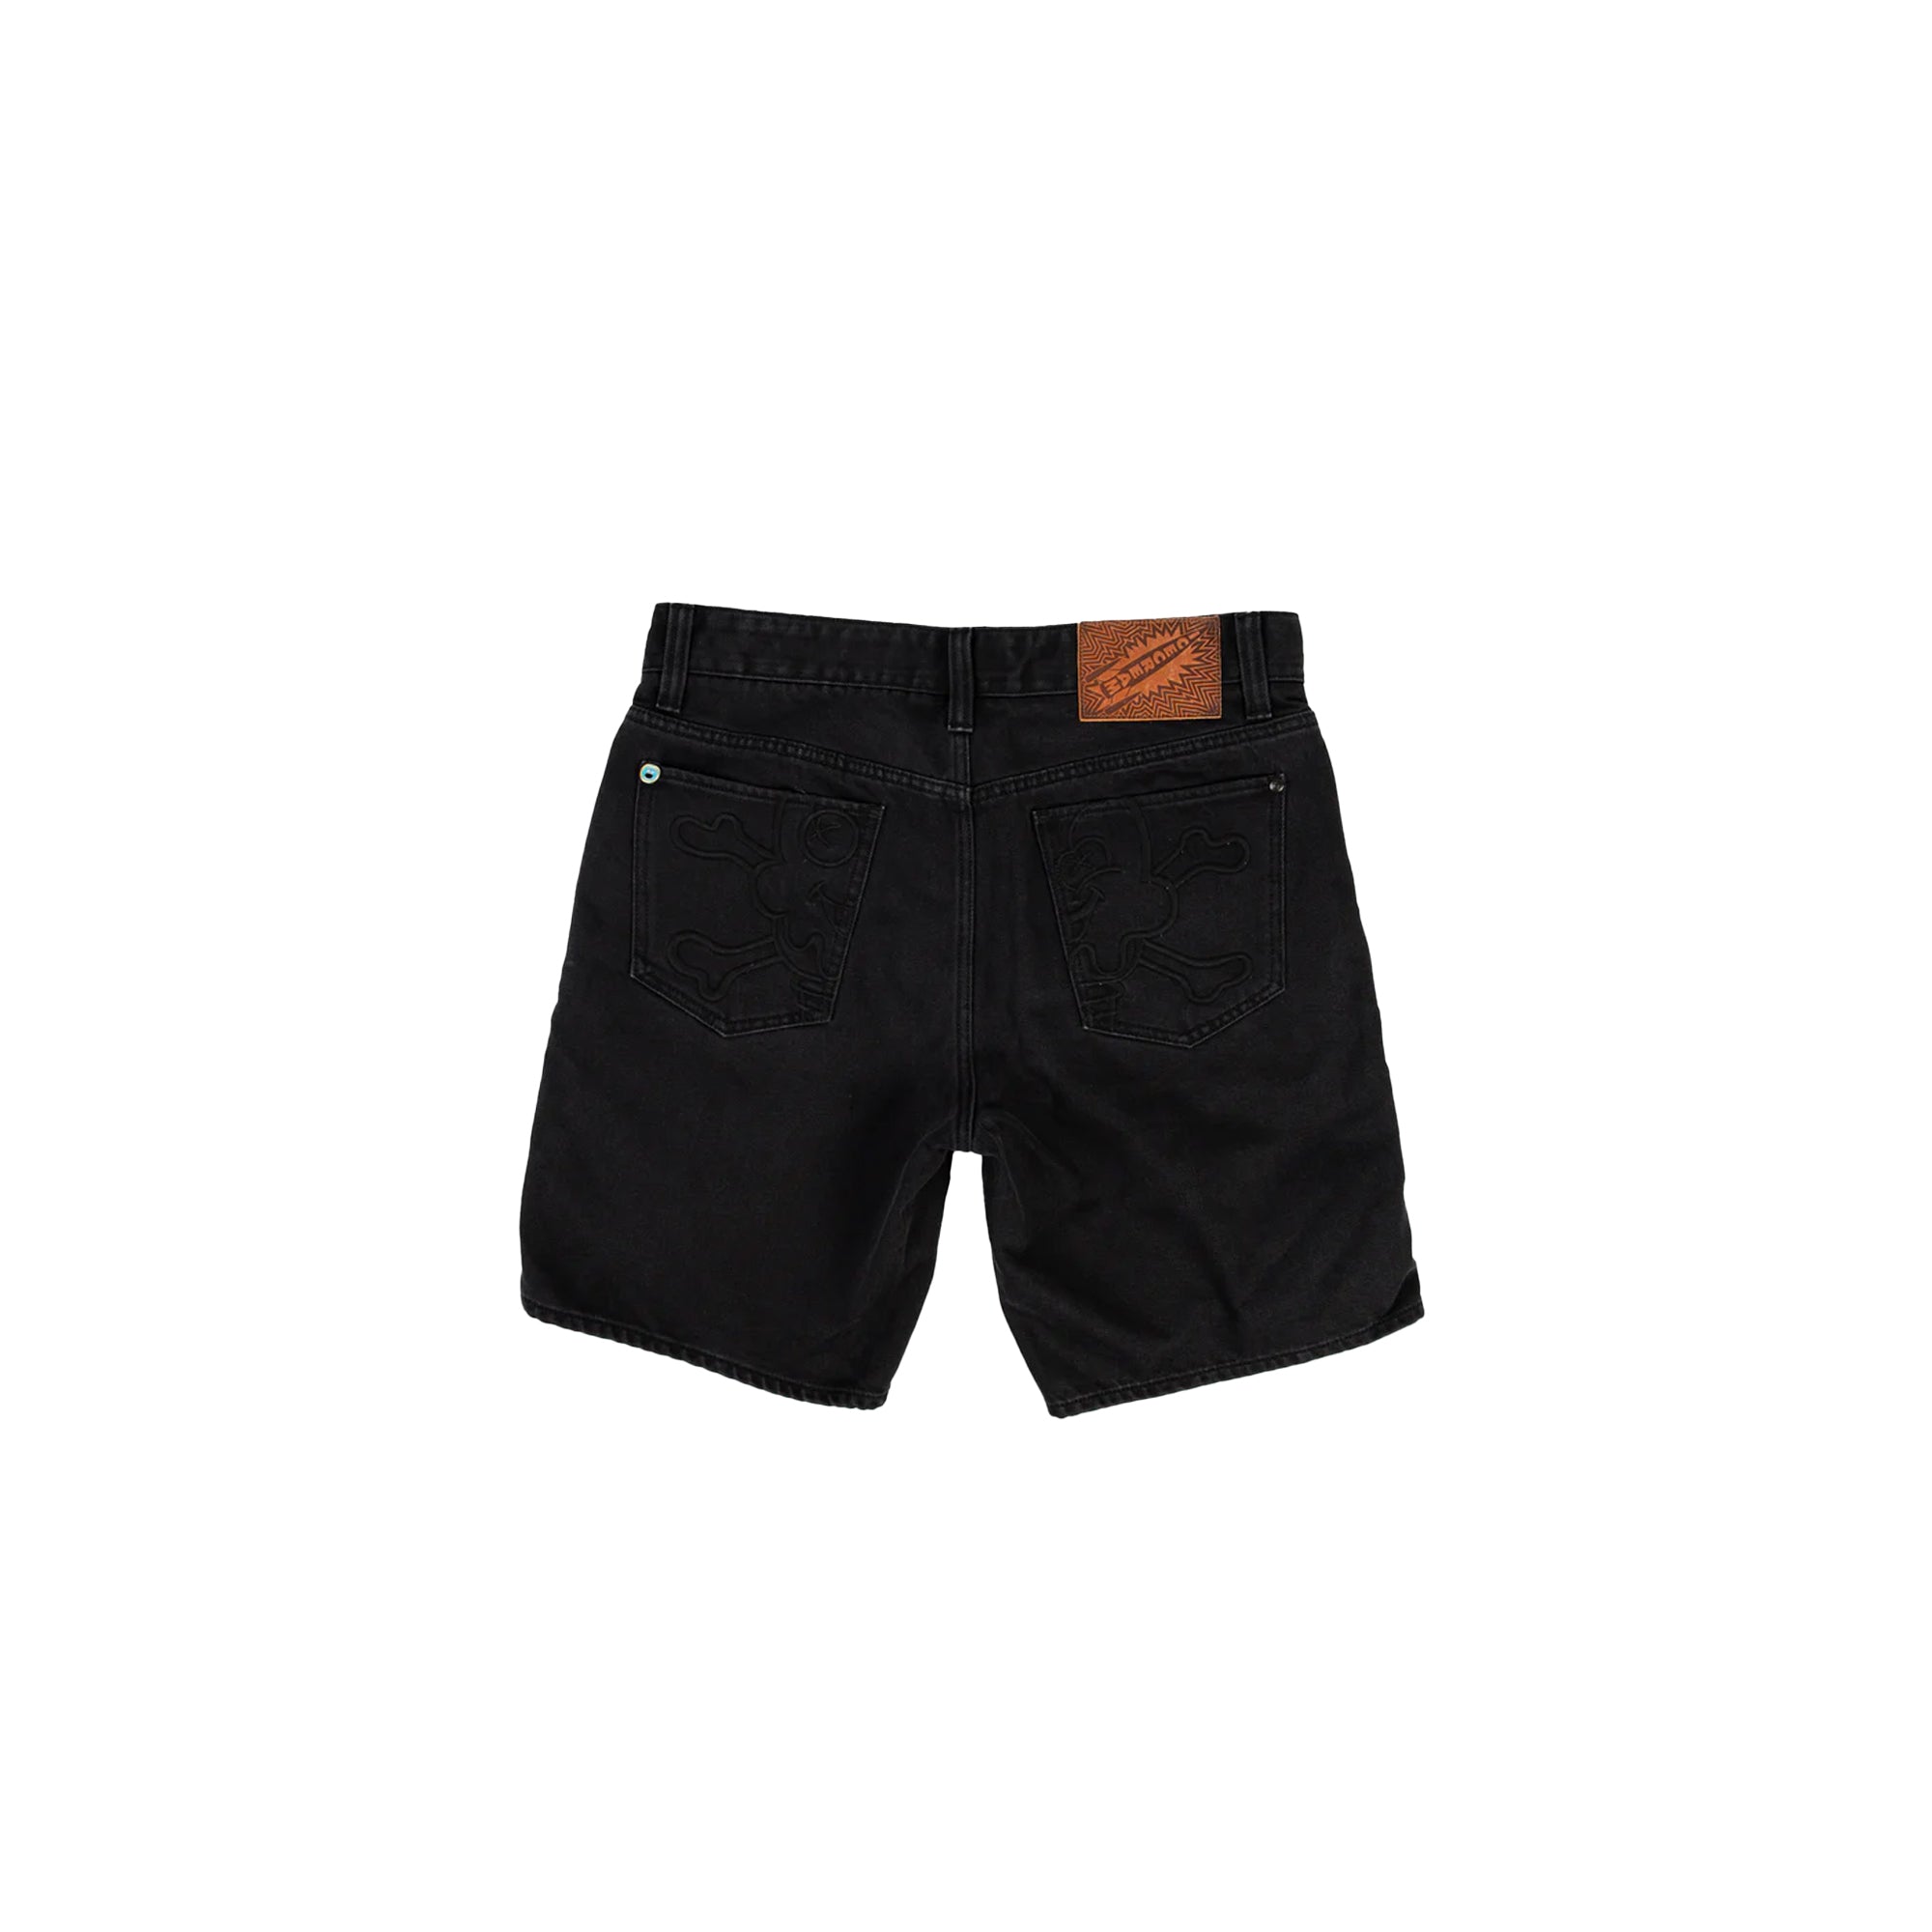 ICECREAM Mens Black Out Jean Shorts